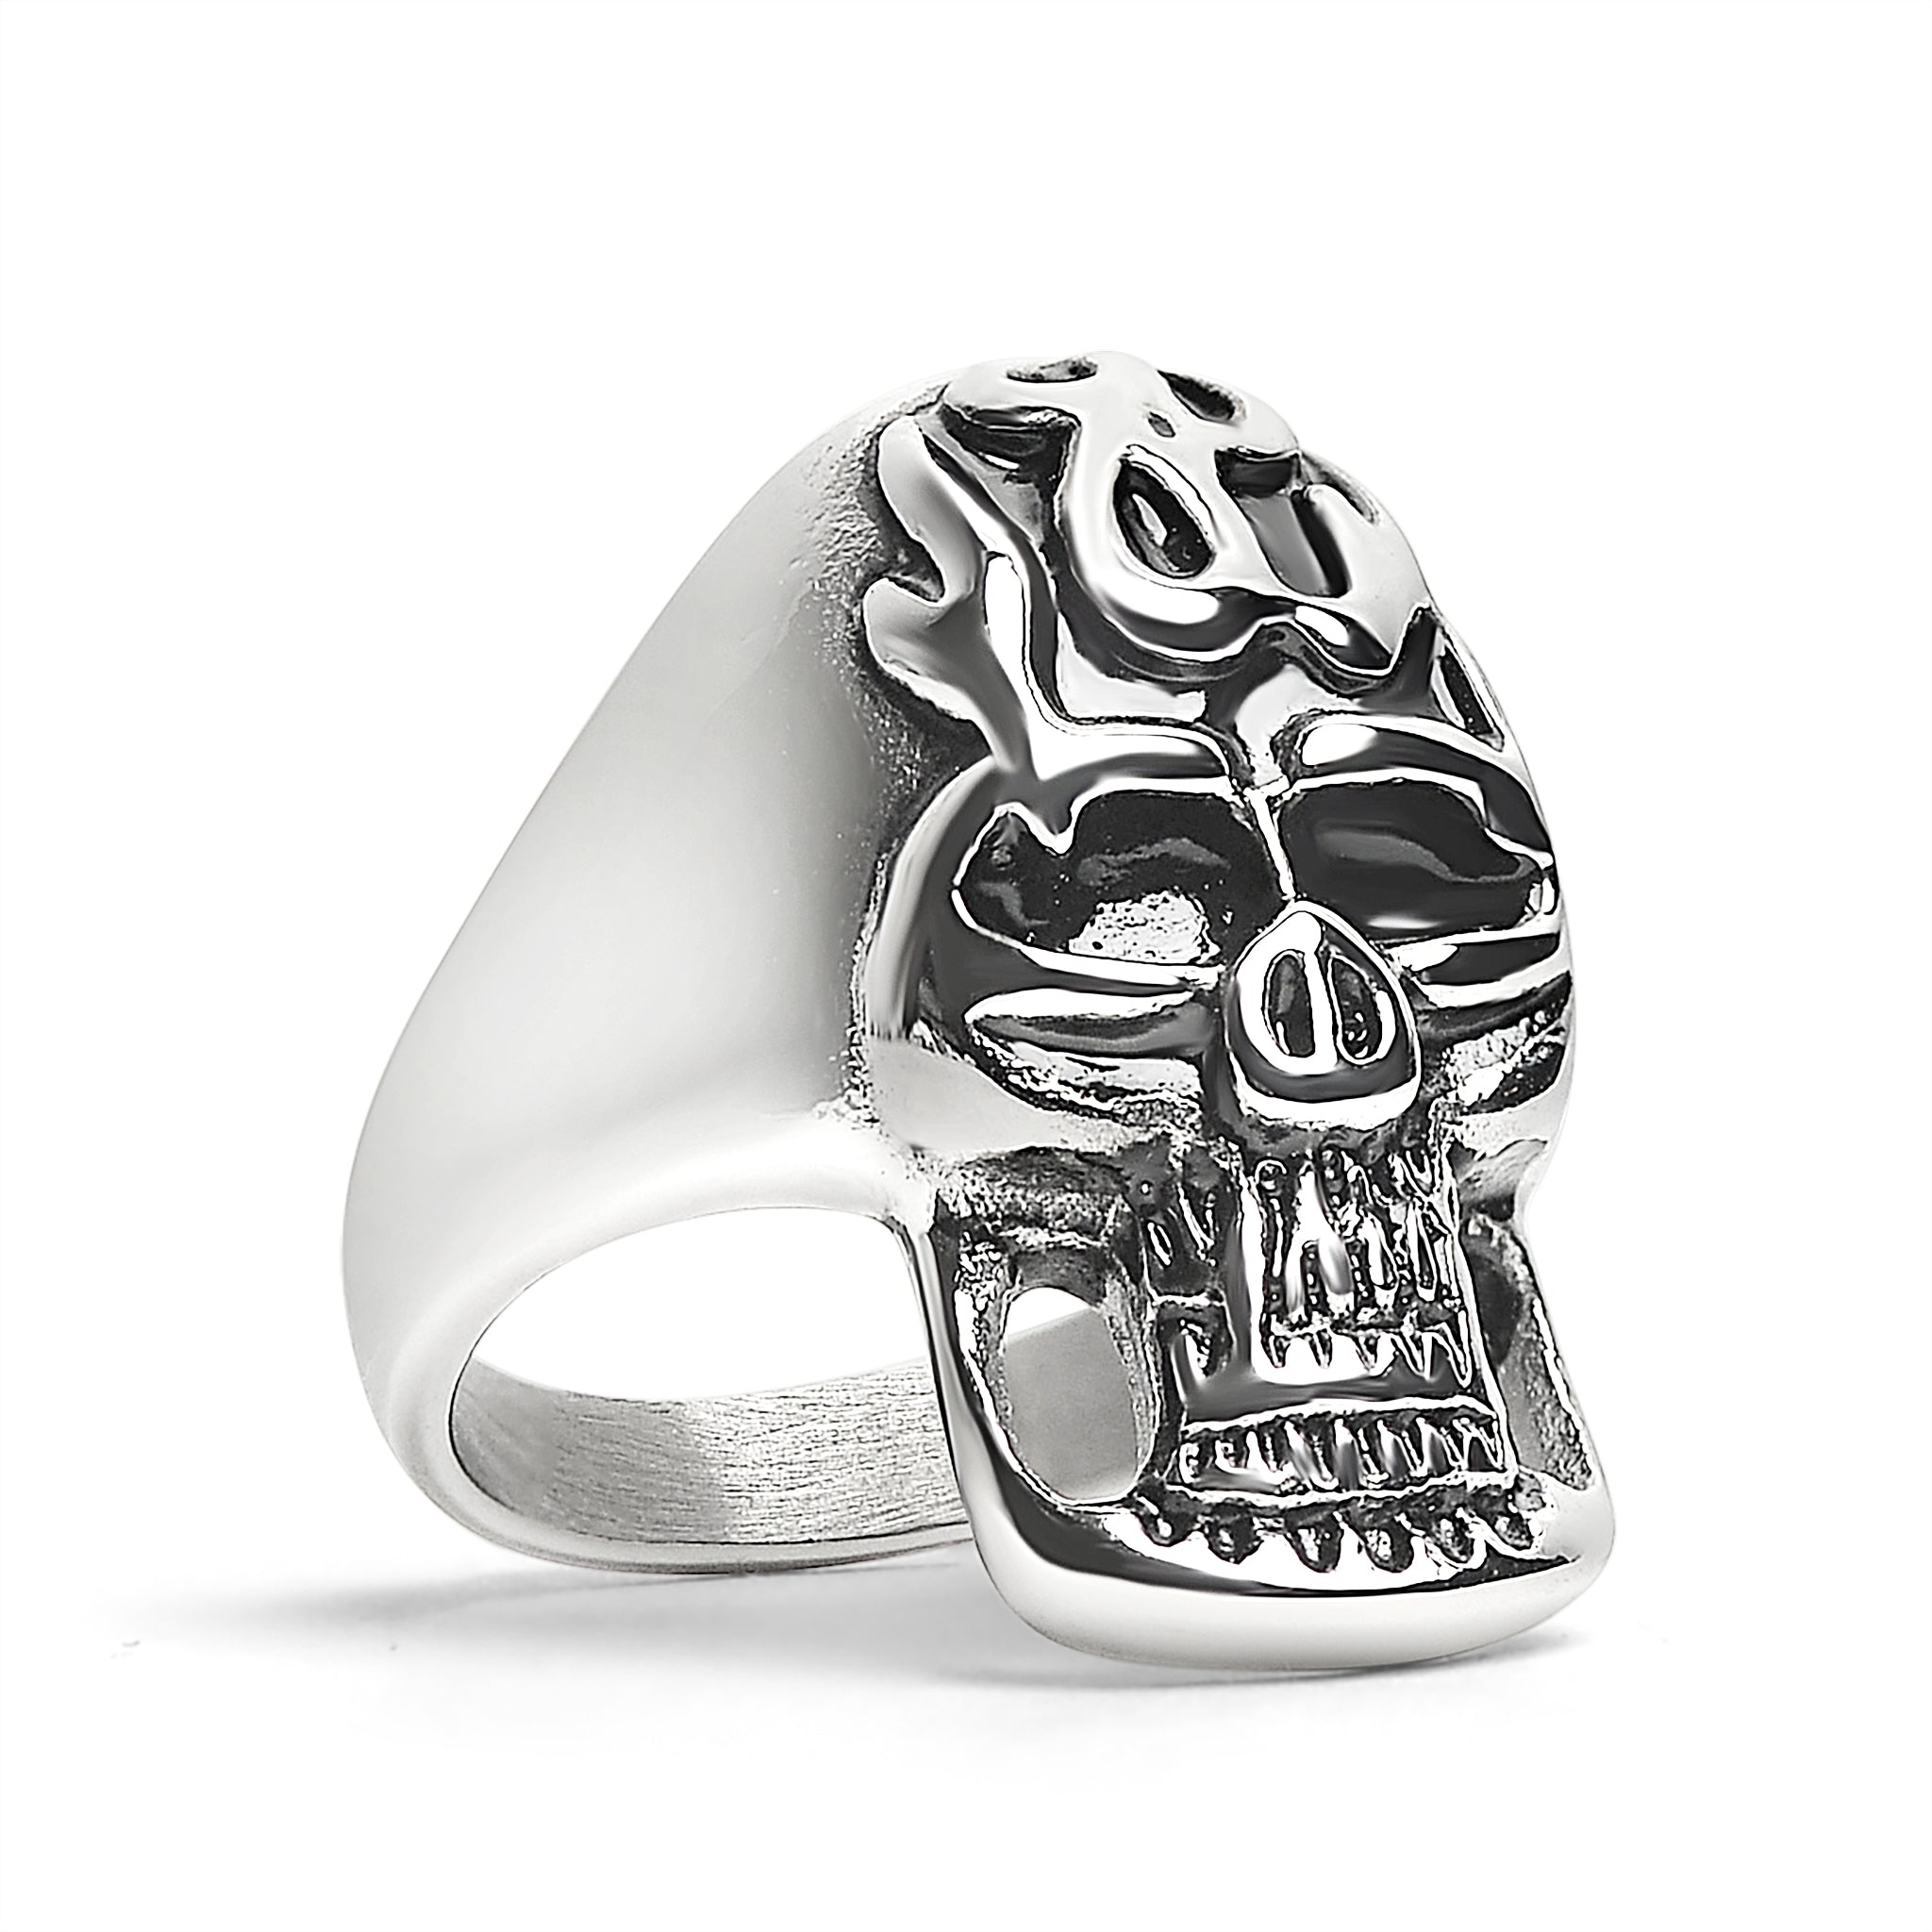 Stainless Steel Polished Flaming Skull Ring / SCR2016